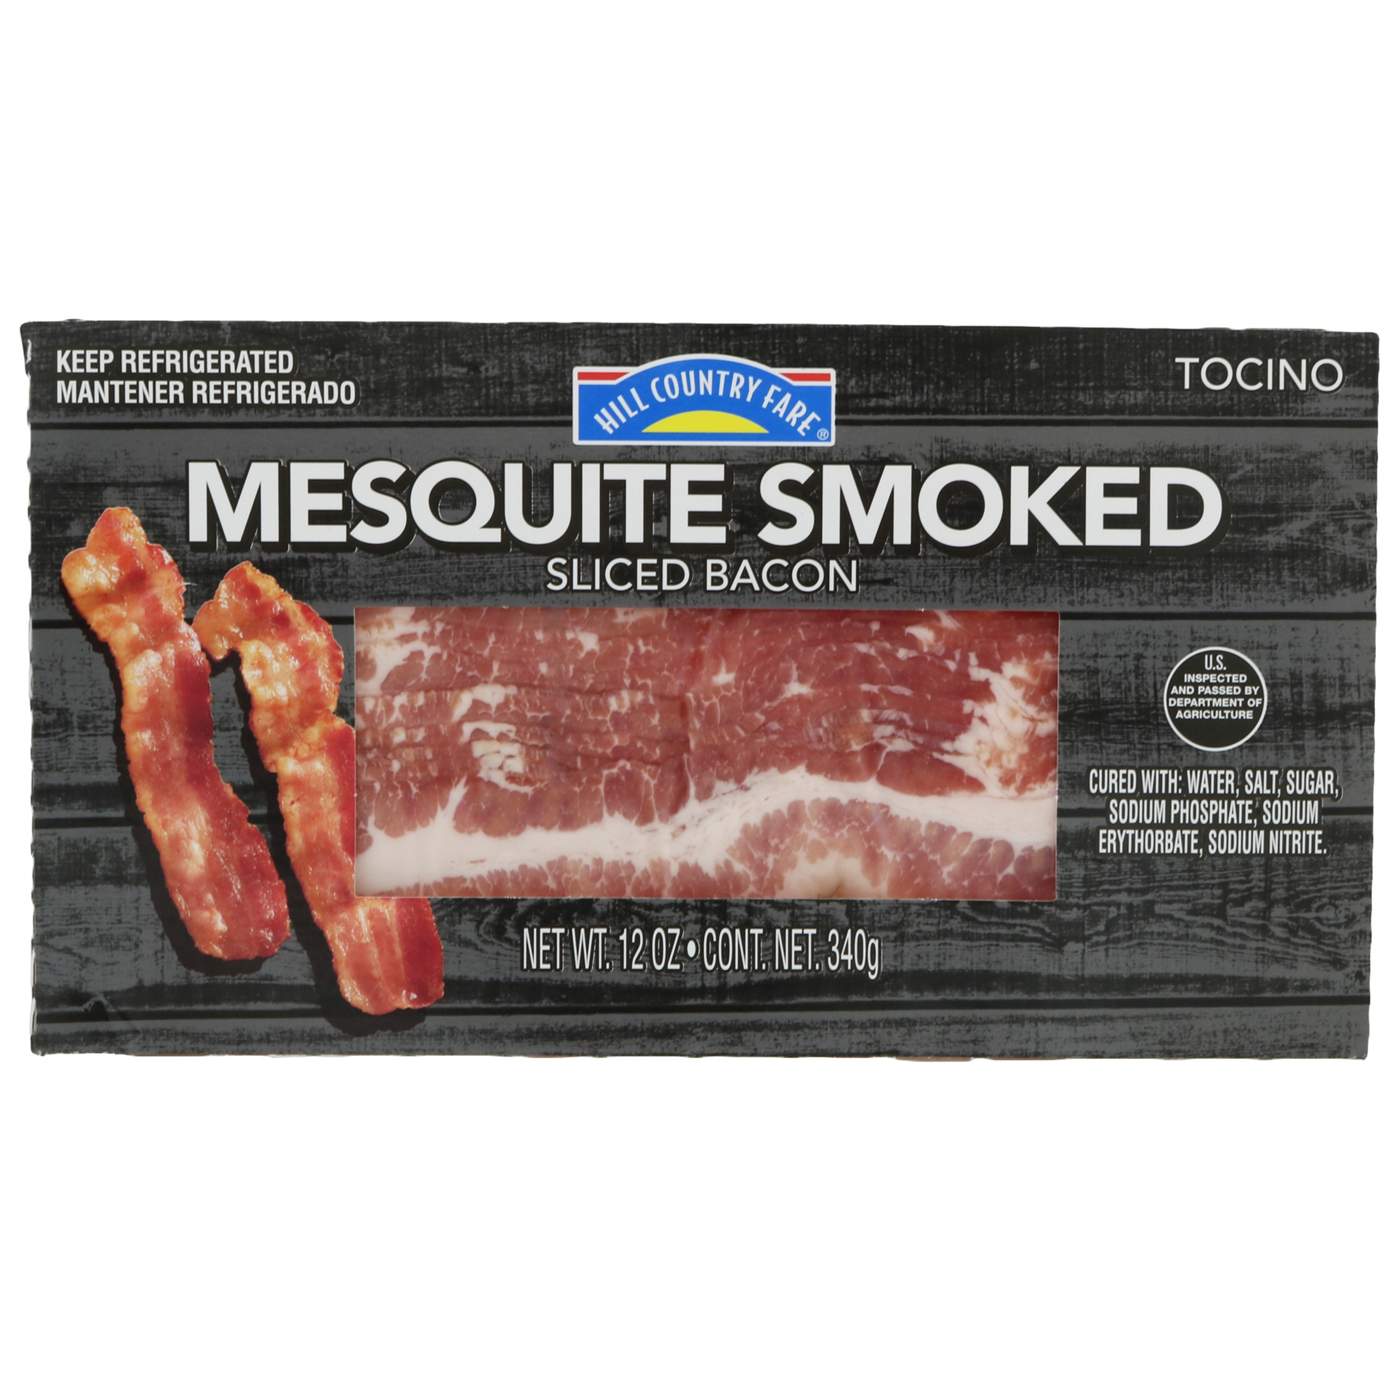 Hill Country Fare Mesquite Smoked Sliced Bacon; image 2 of 2